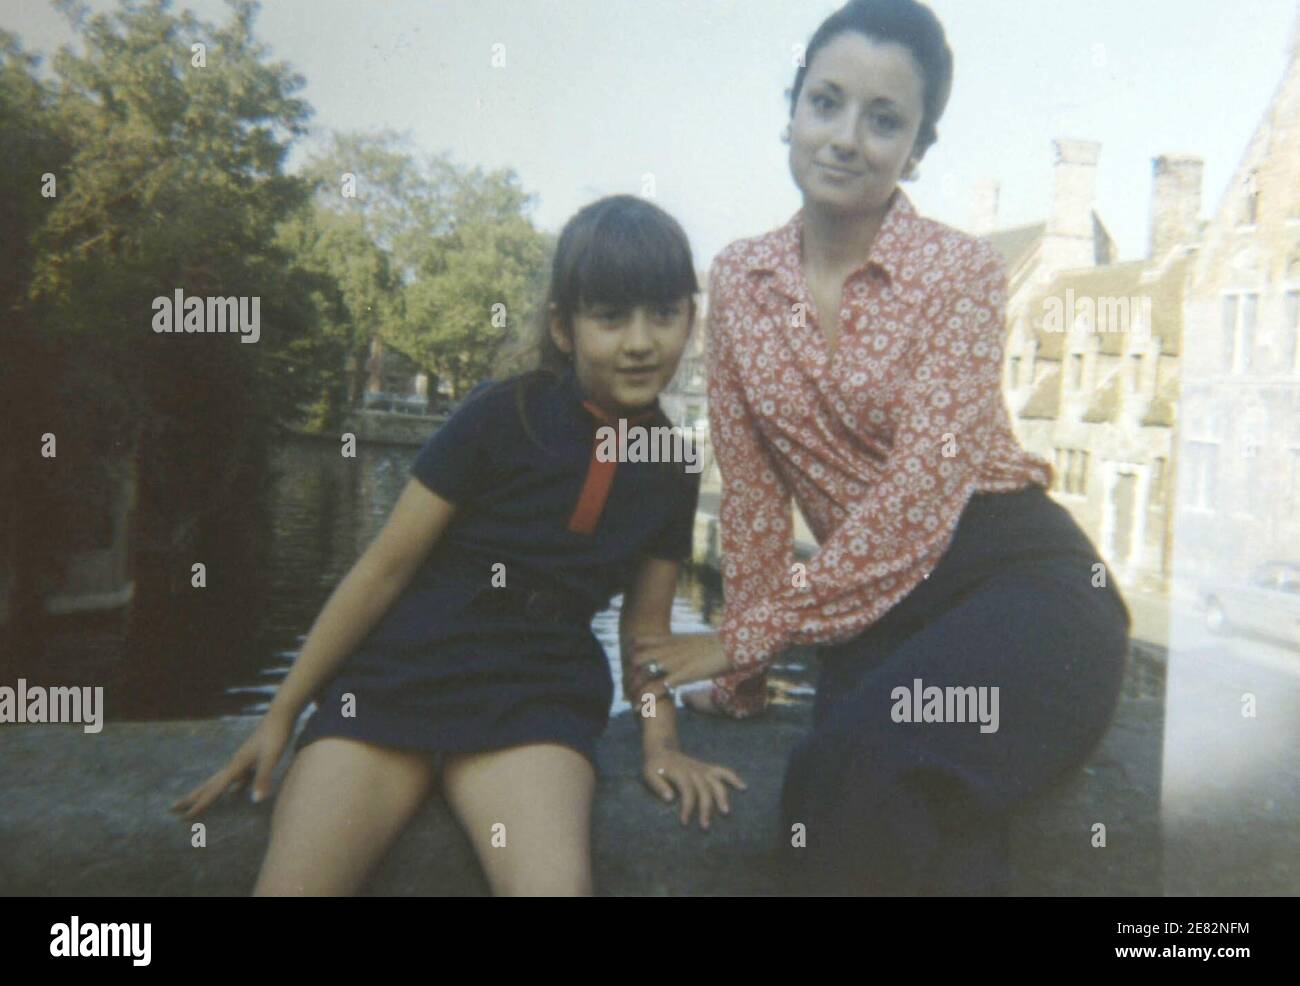 Yolanda Pulacio with her daughter Ingrid. Ingrid Betancourt was kidnapped by the FARC (Fuerzas Armadas Revolucionarias de Colombia) on February 23, 2002 while campaigning for the Colombian presidential election and is still being held. Photo Courtesy Betancourt's Family via ABACAPRESS.COM Stock Photo